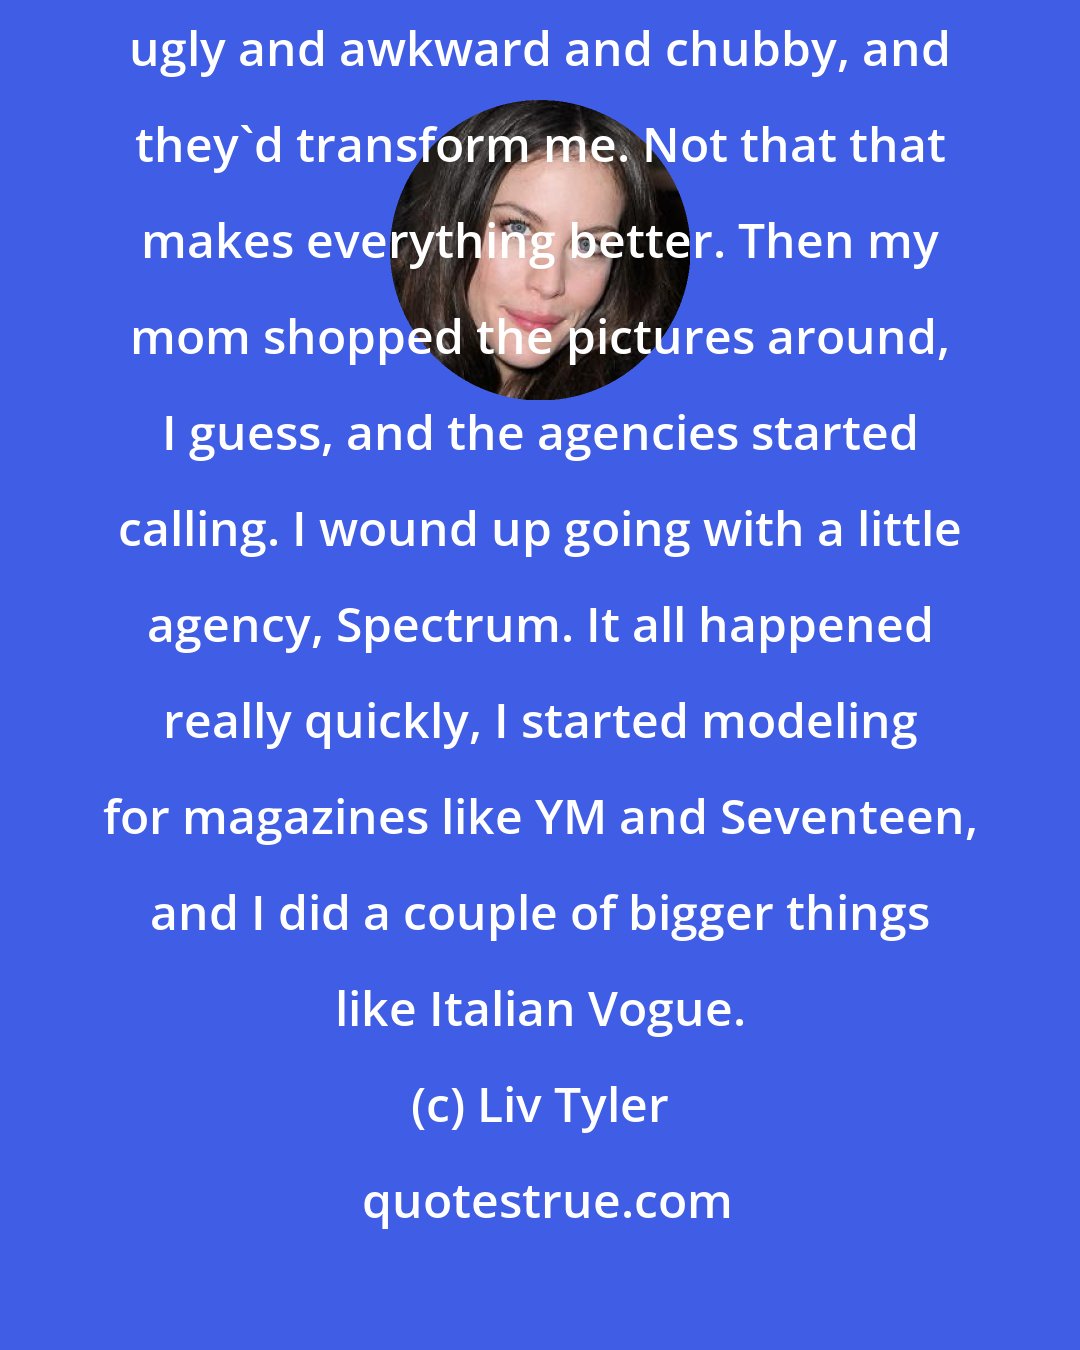 Liv Tyler: Being a teenage model was lot of fun, like playing dress-up. I'd feel ugly and awkward and chubby, and they'd transform me. Not that that makes everything better. Then my mom shopped the pictures around, I guess, and the agencies started calling. I wound up going with a little agency, Spectrum. It all happened really quickly, I started modeling for magazines like YM and Seventeen, and I did a couple of bigger things like Italian Vogue.